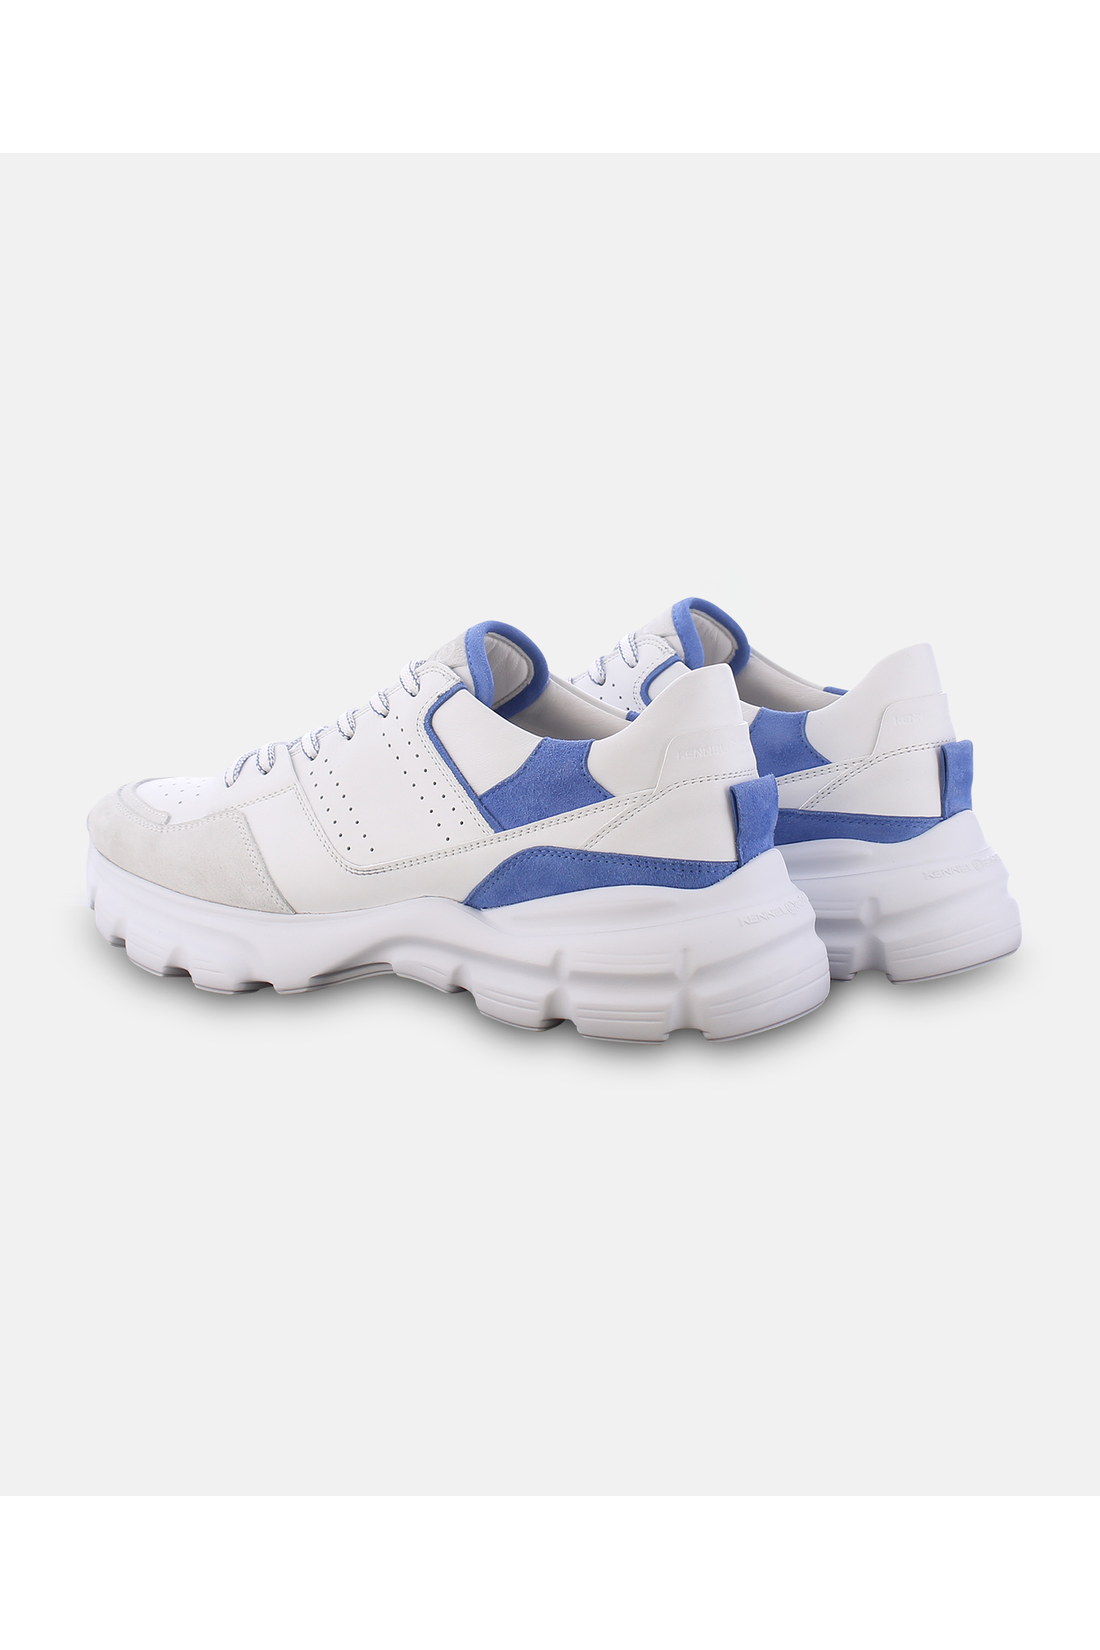 Kennel-Schmenger-OUTLET-SALE-FEVER-Sneakers-ARCHIVE-COLLECTION-2_be6b2c2d-425f-4526-98d8-1c9939f5c6d8.png